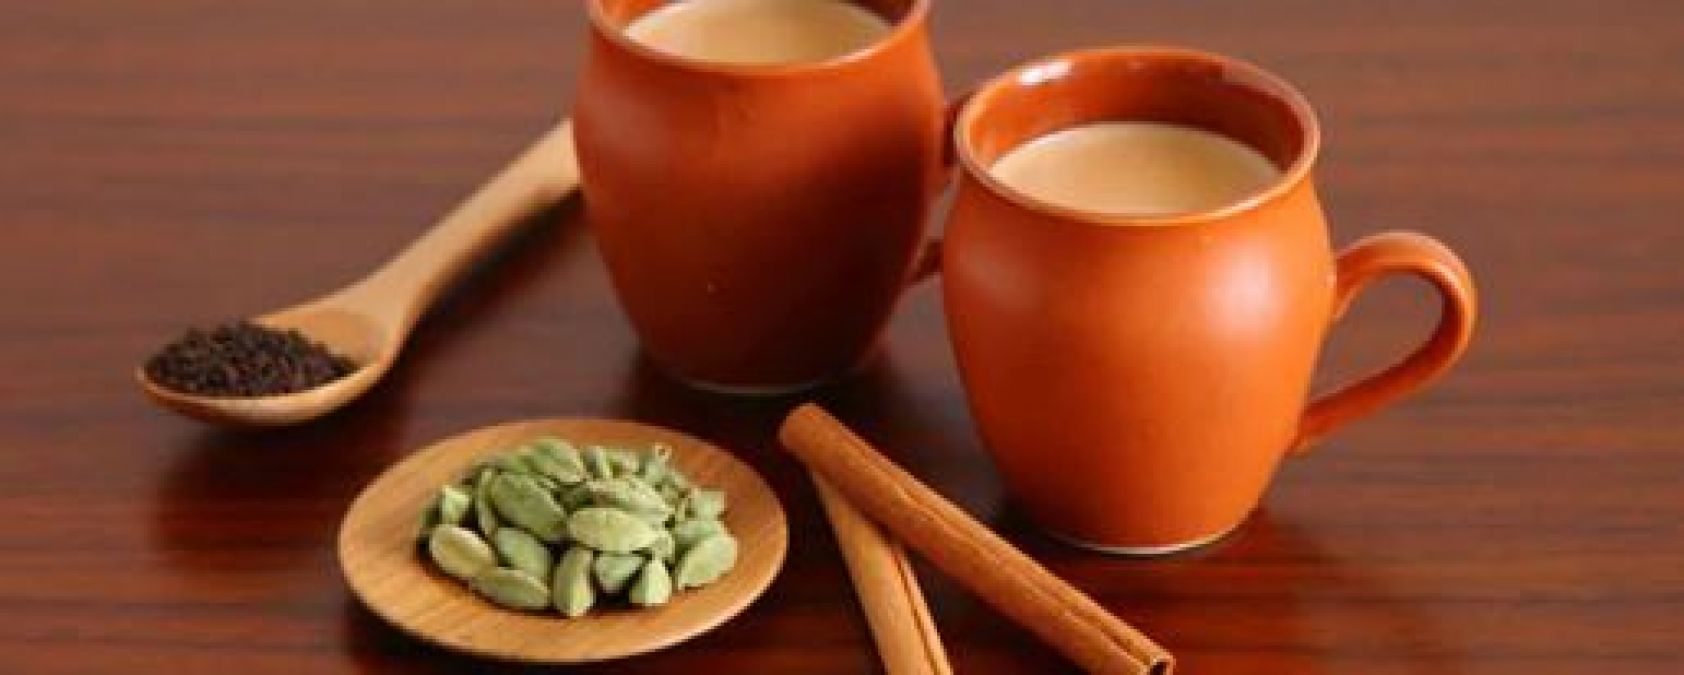 Cardamom tea protects against heart diseases, know its shocking benefits